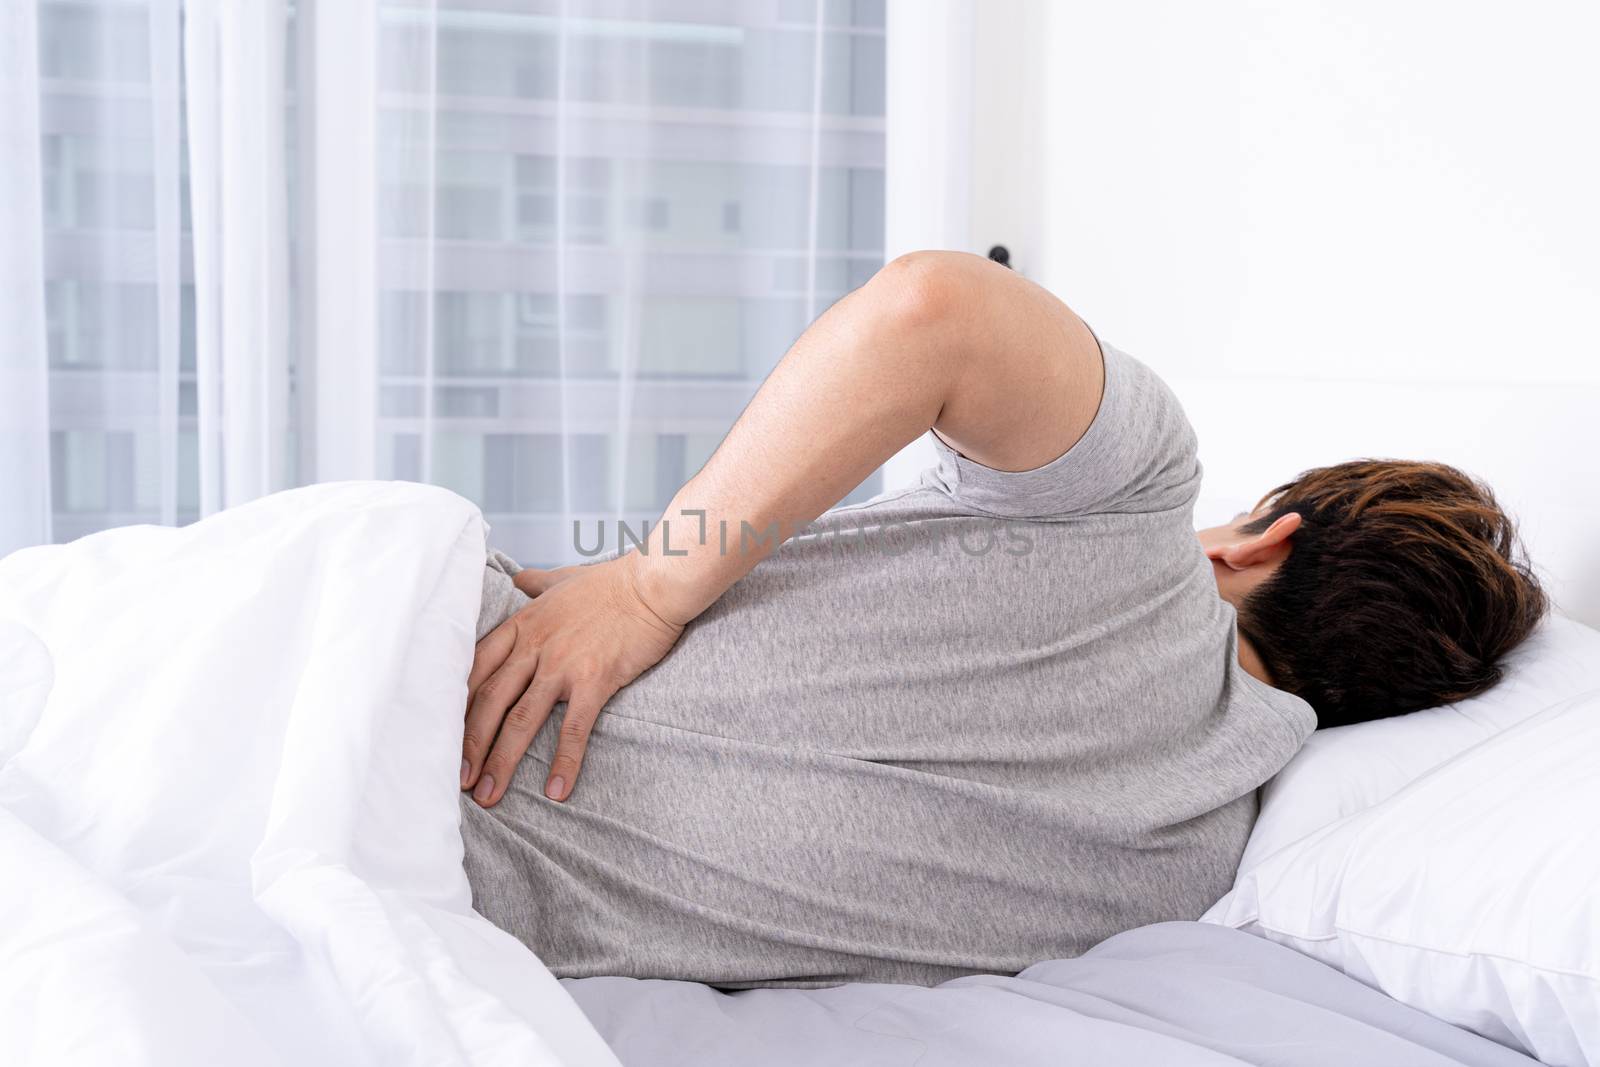 Young man suffering back pain from uncomfortable bed. Healthcare medical or daily life concept.